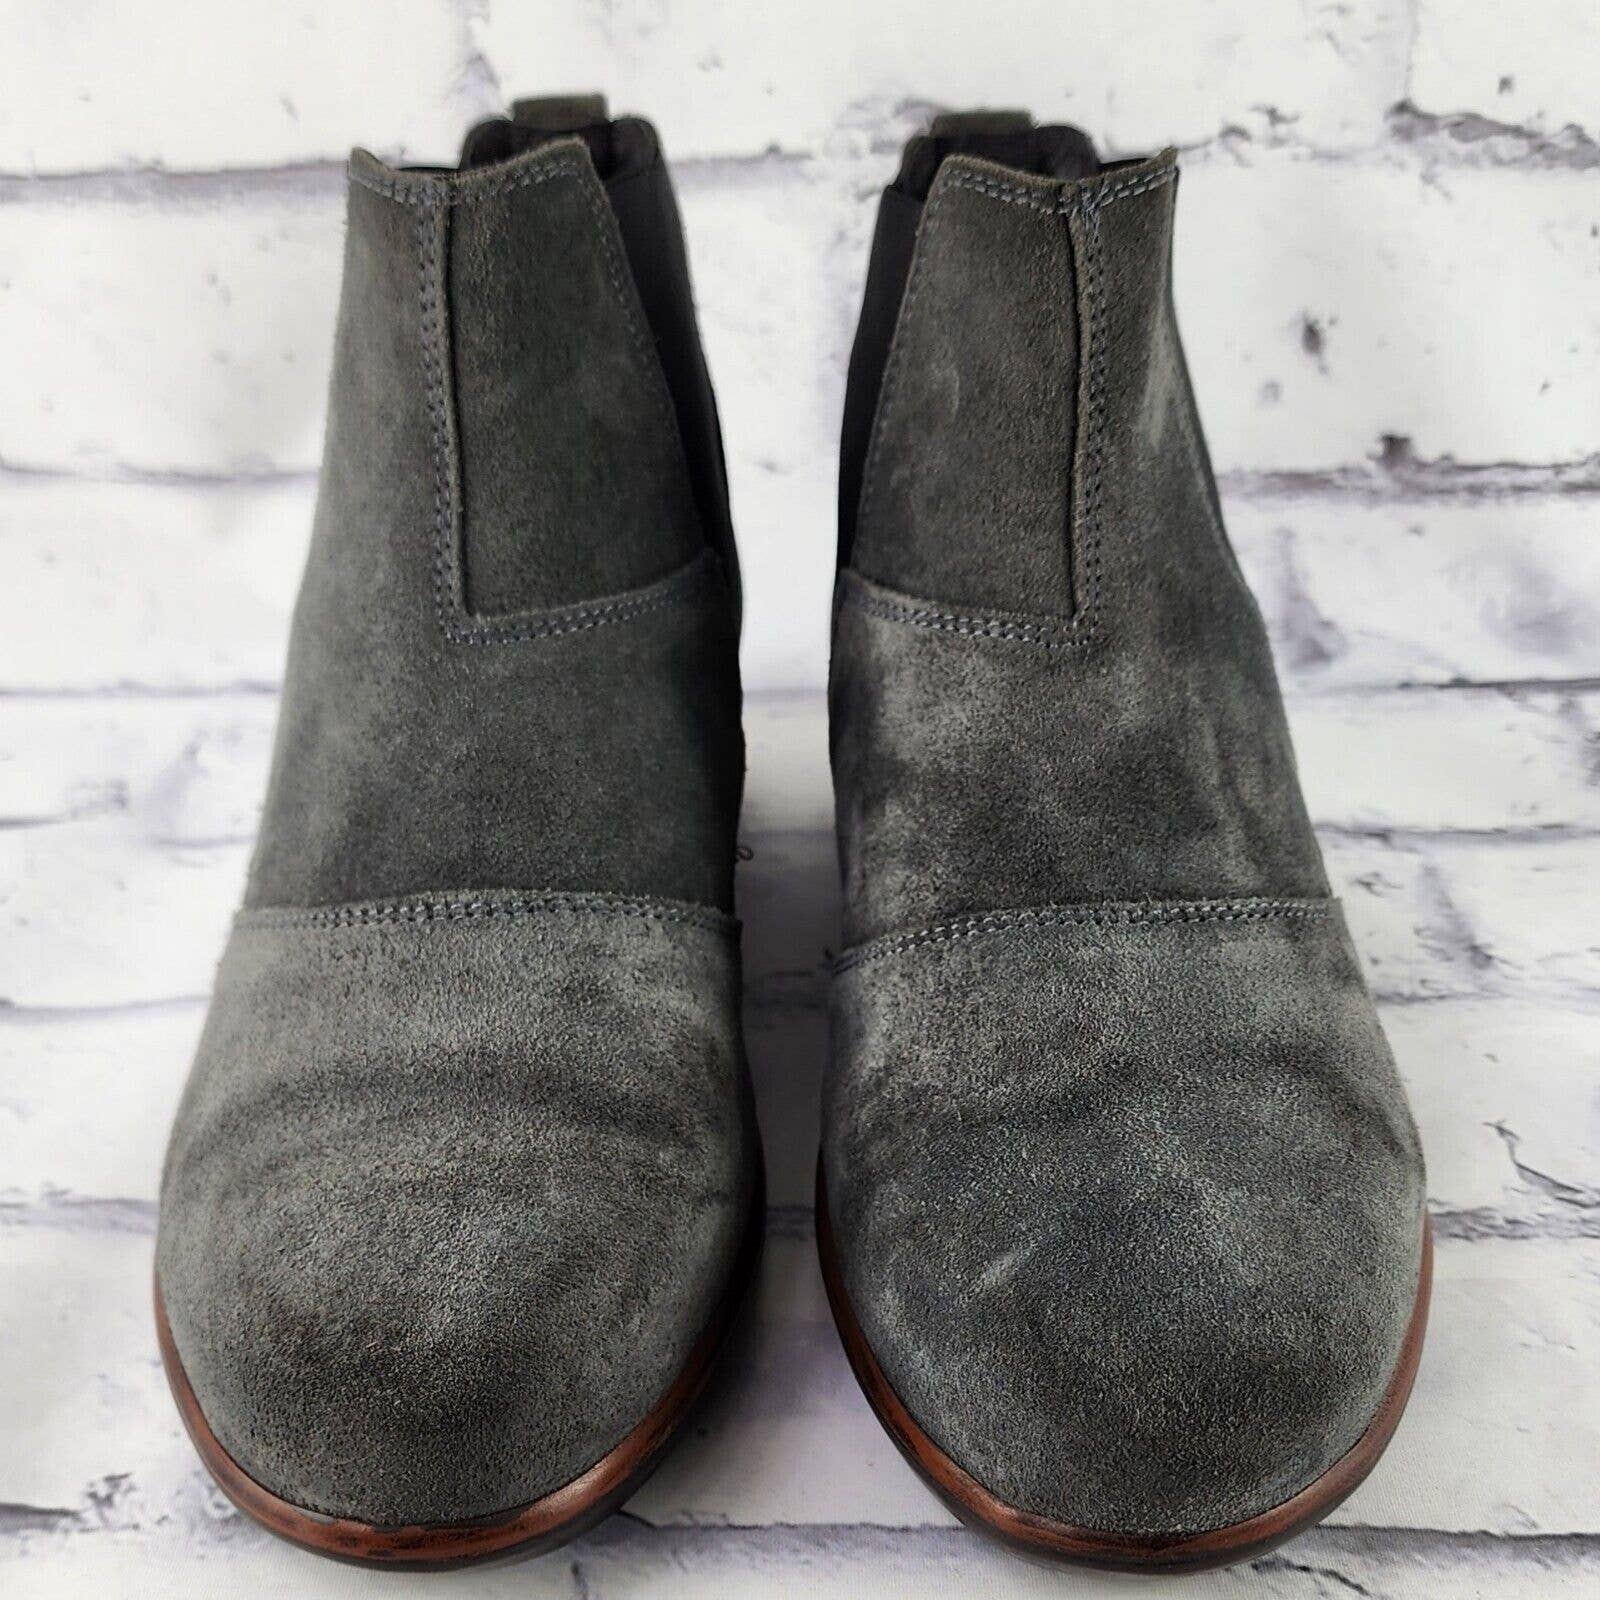 Naot Ruzgar Ankle Booties Women's Sz 39 (US 8) Gray Suede Chelsea Boots